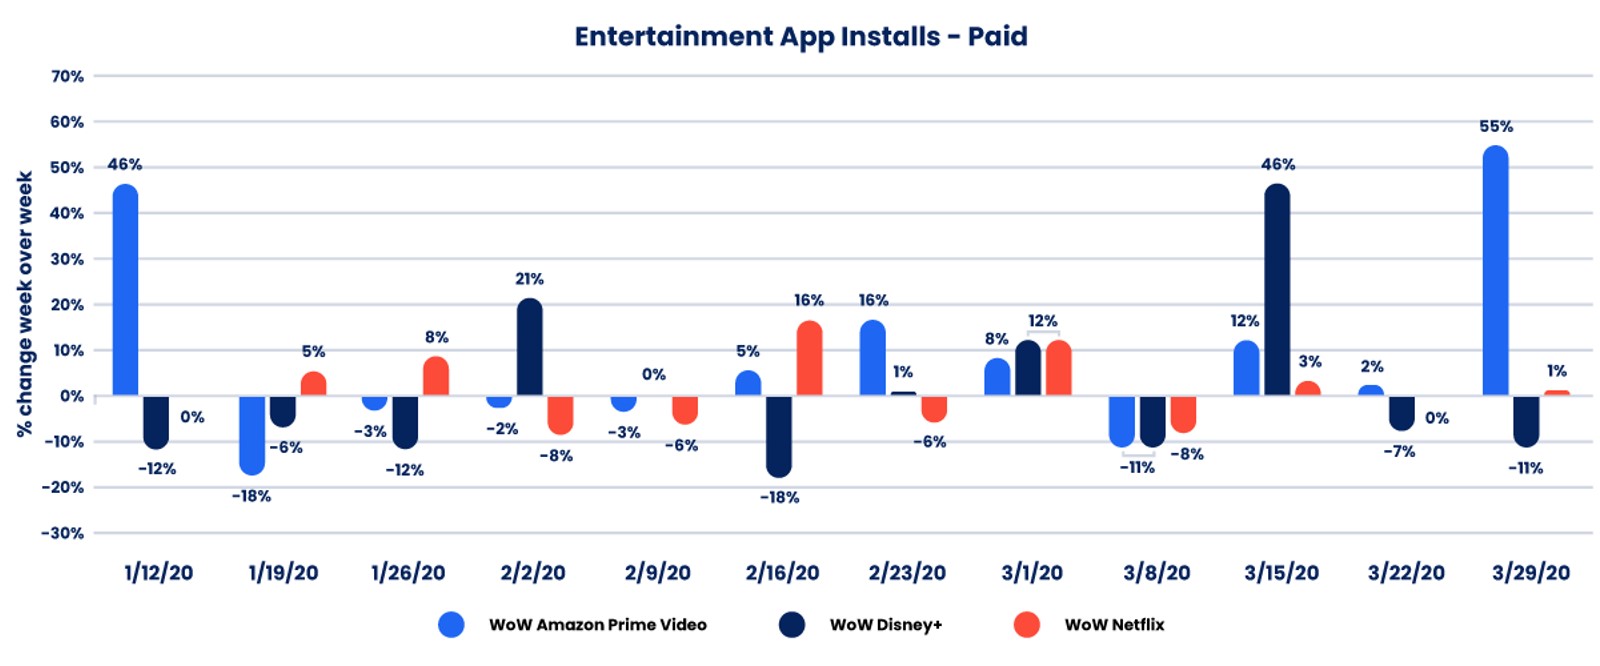 Paid Entertainment Apps